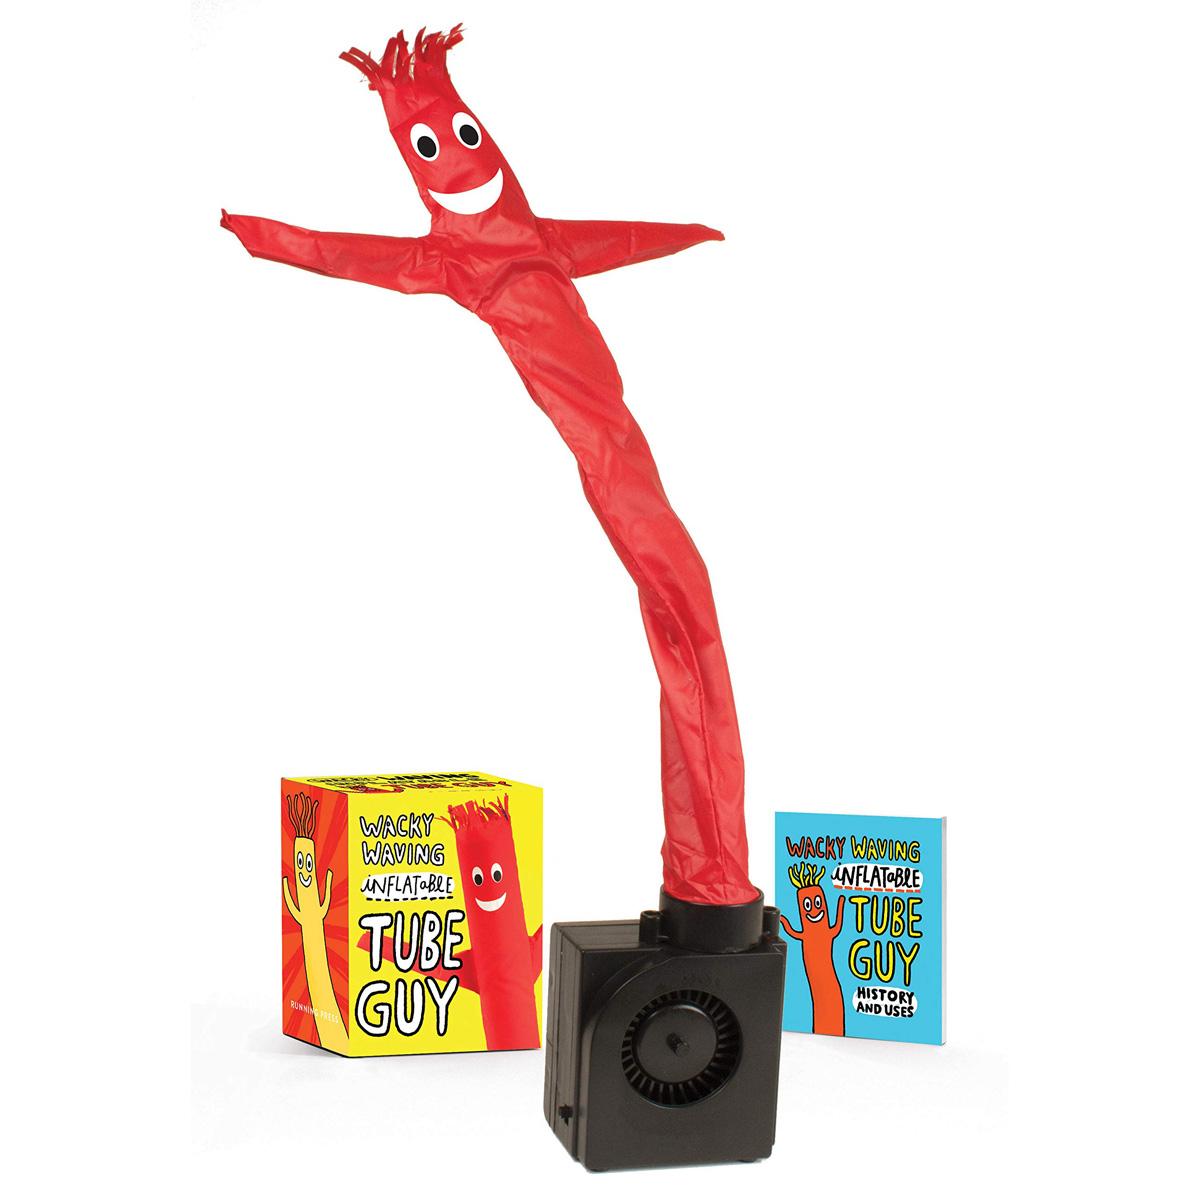 18in Wacky Waving Inflatable Tube Guy for $6.79